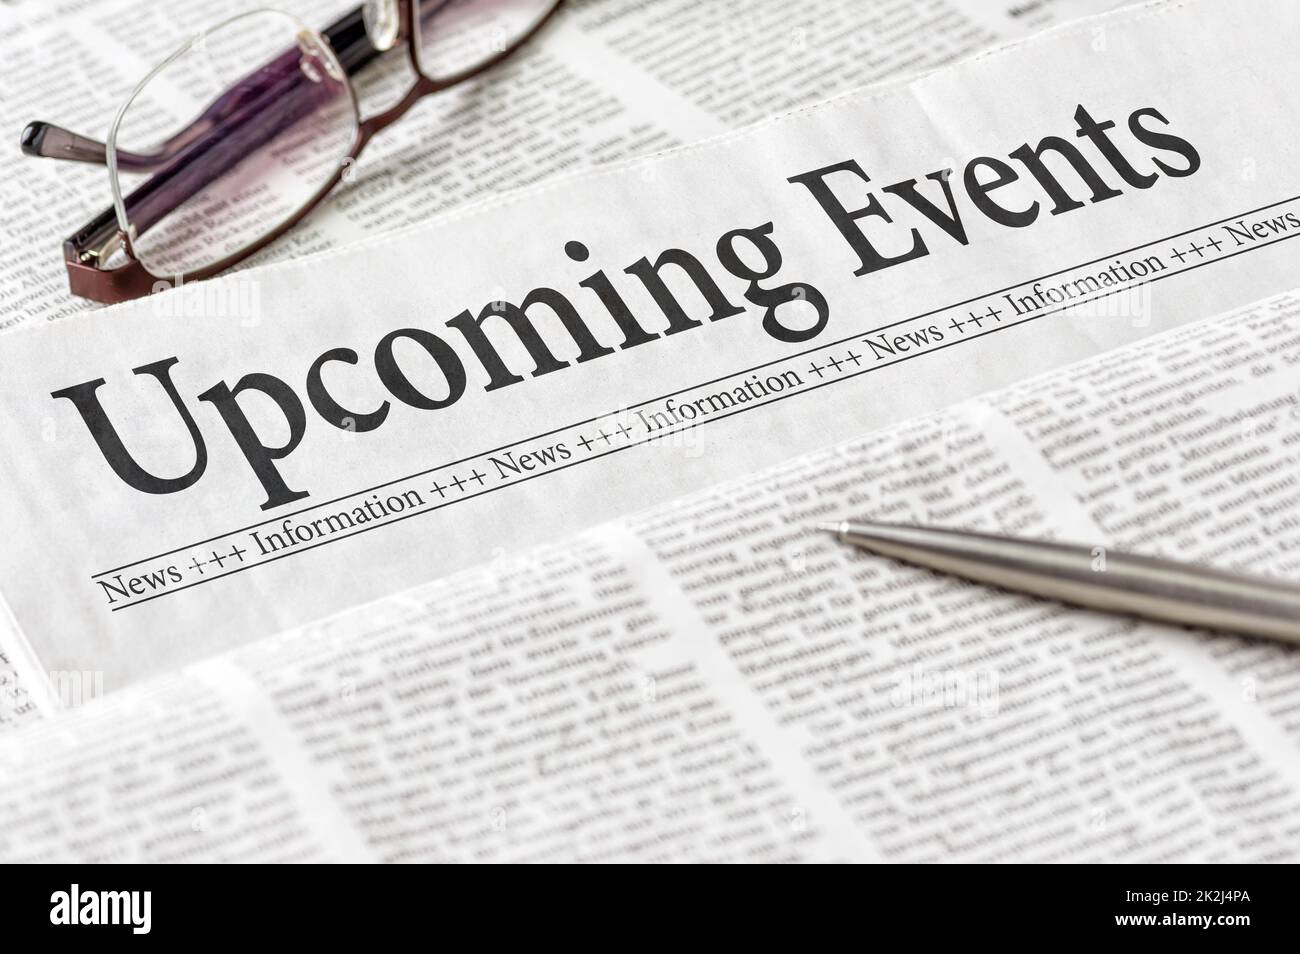 A newspaper with the headline Upcoming events Stock Photo